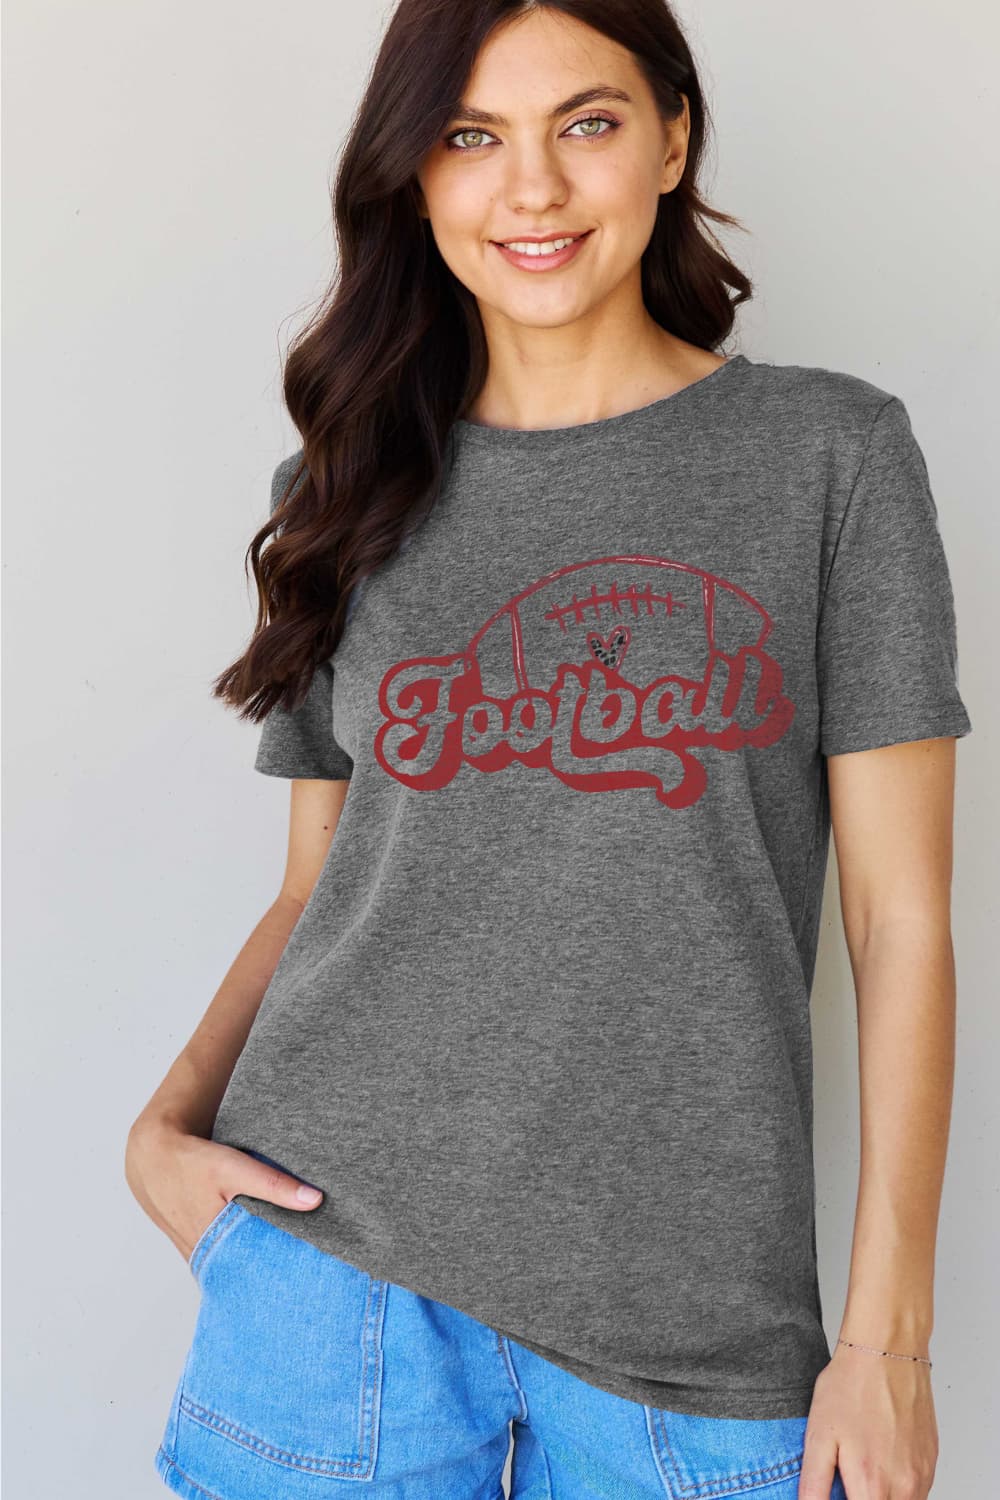 Simply Love Full Size FOOTBALL Graphic Cotton Tee